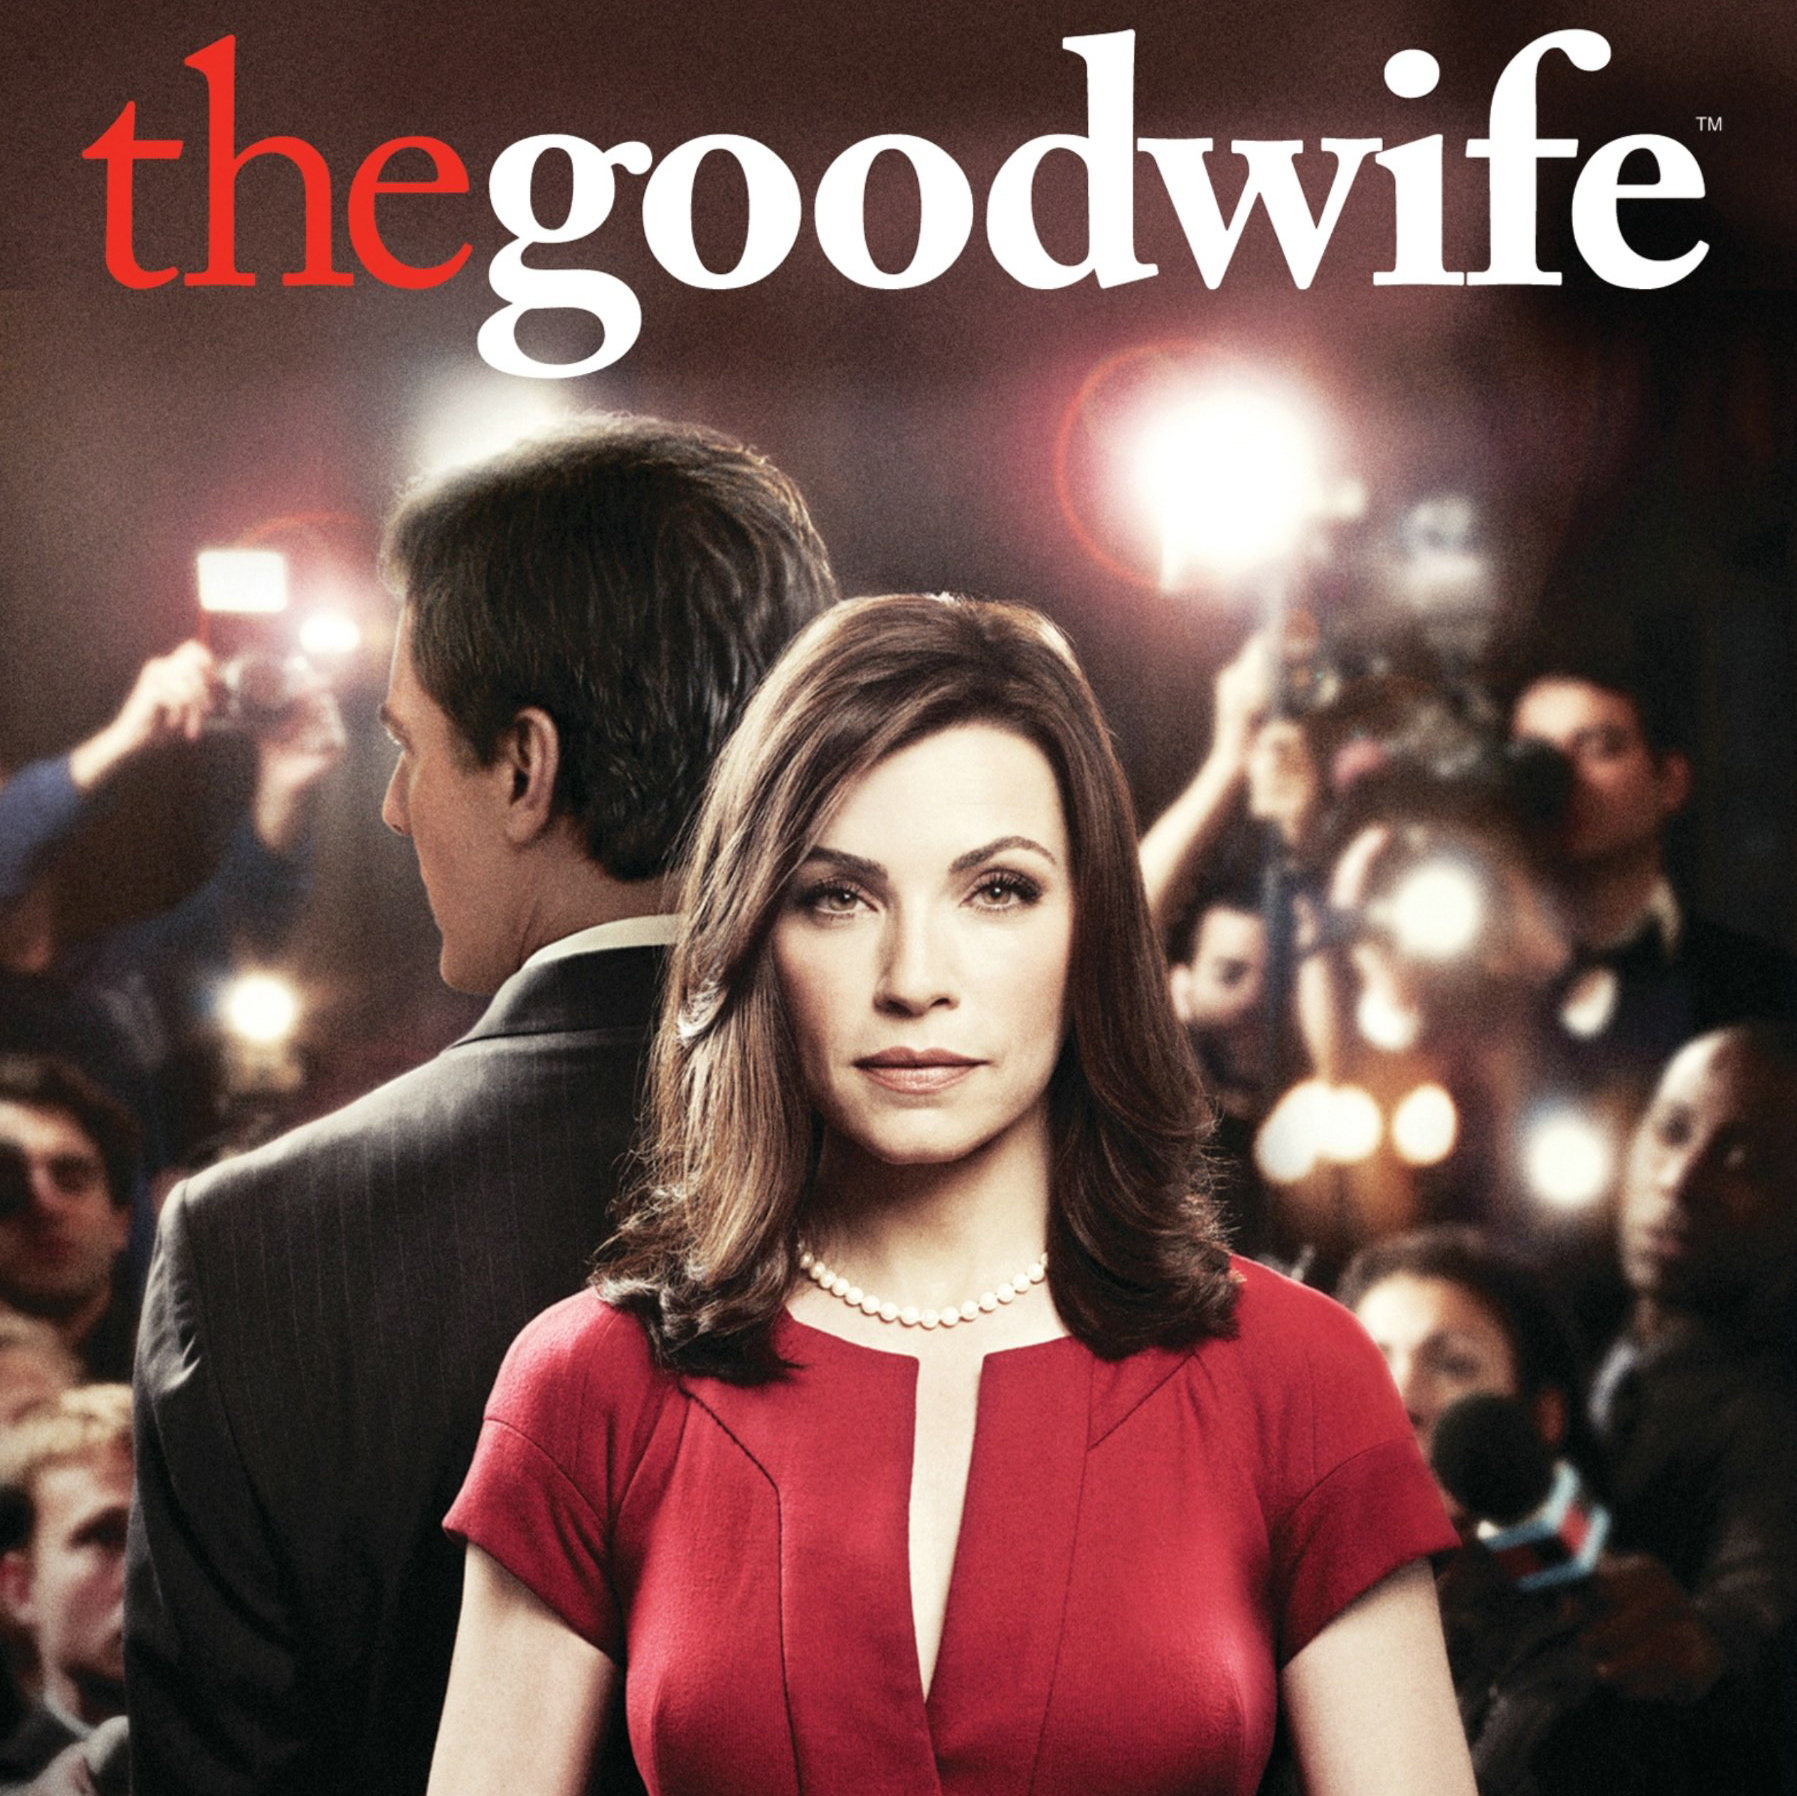 the-good-wife-the-first-season-dvd-cover-42.jpg